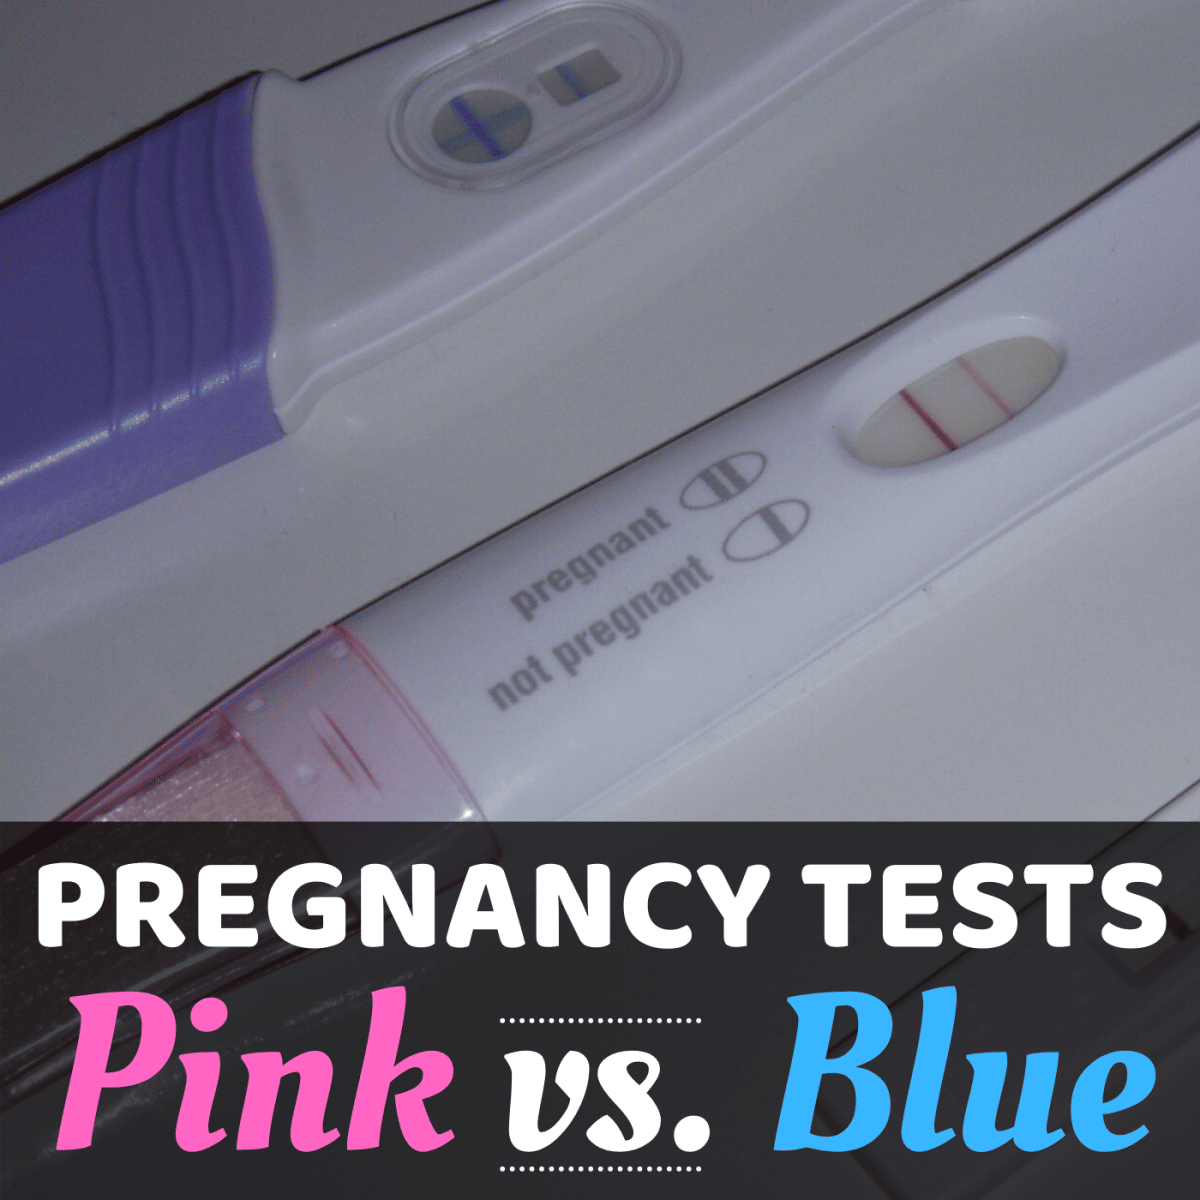 Getting Pregnant After Depo Provera Shots